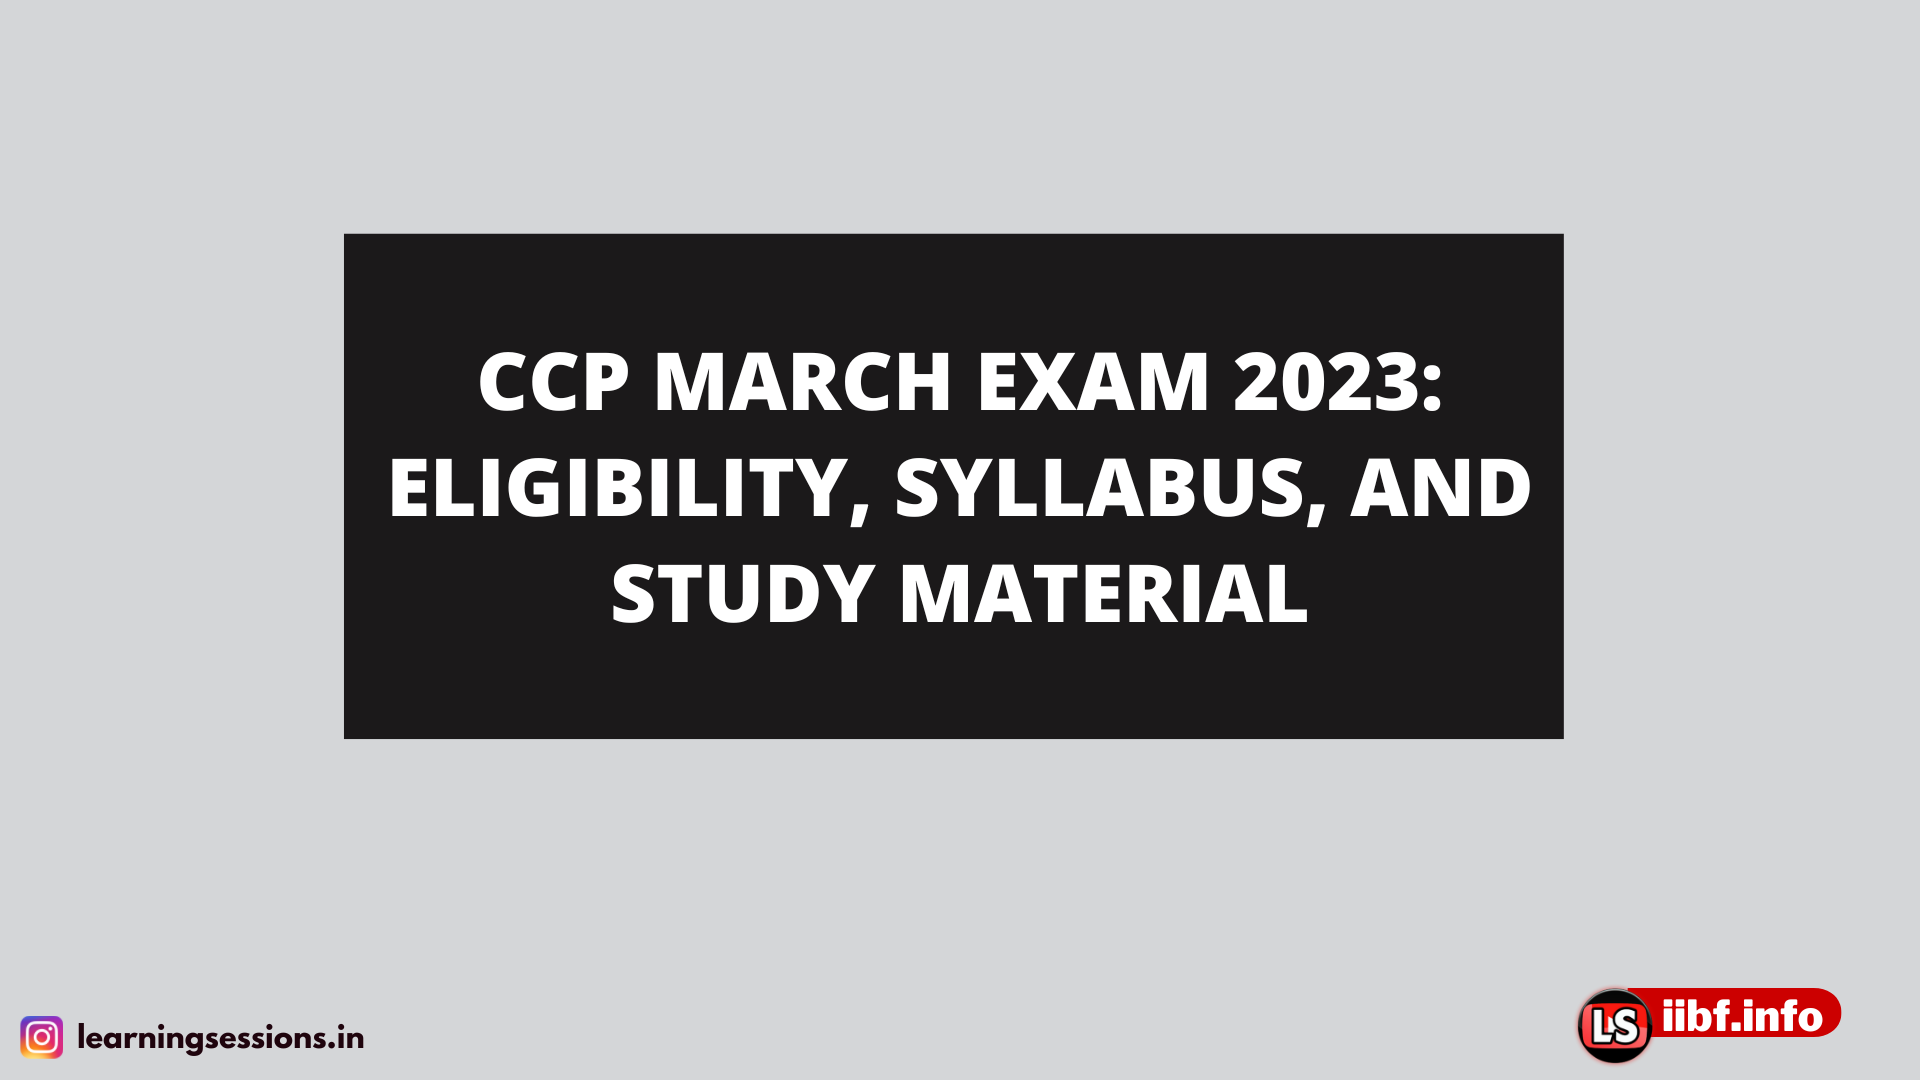 CCP EXAM 2022: ELIGIBILITY, SYLLABUS, AND STUDY MATERIAL